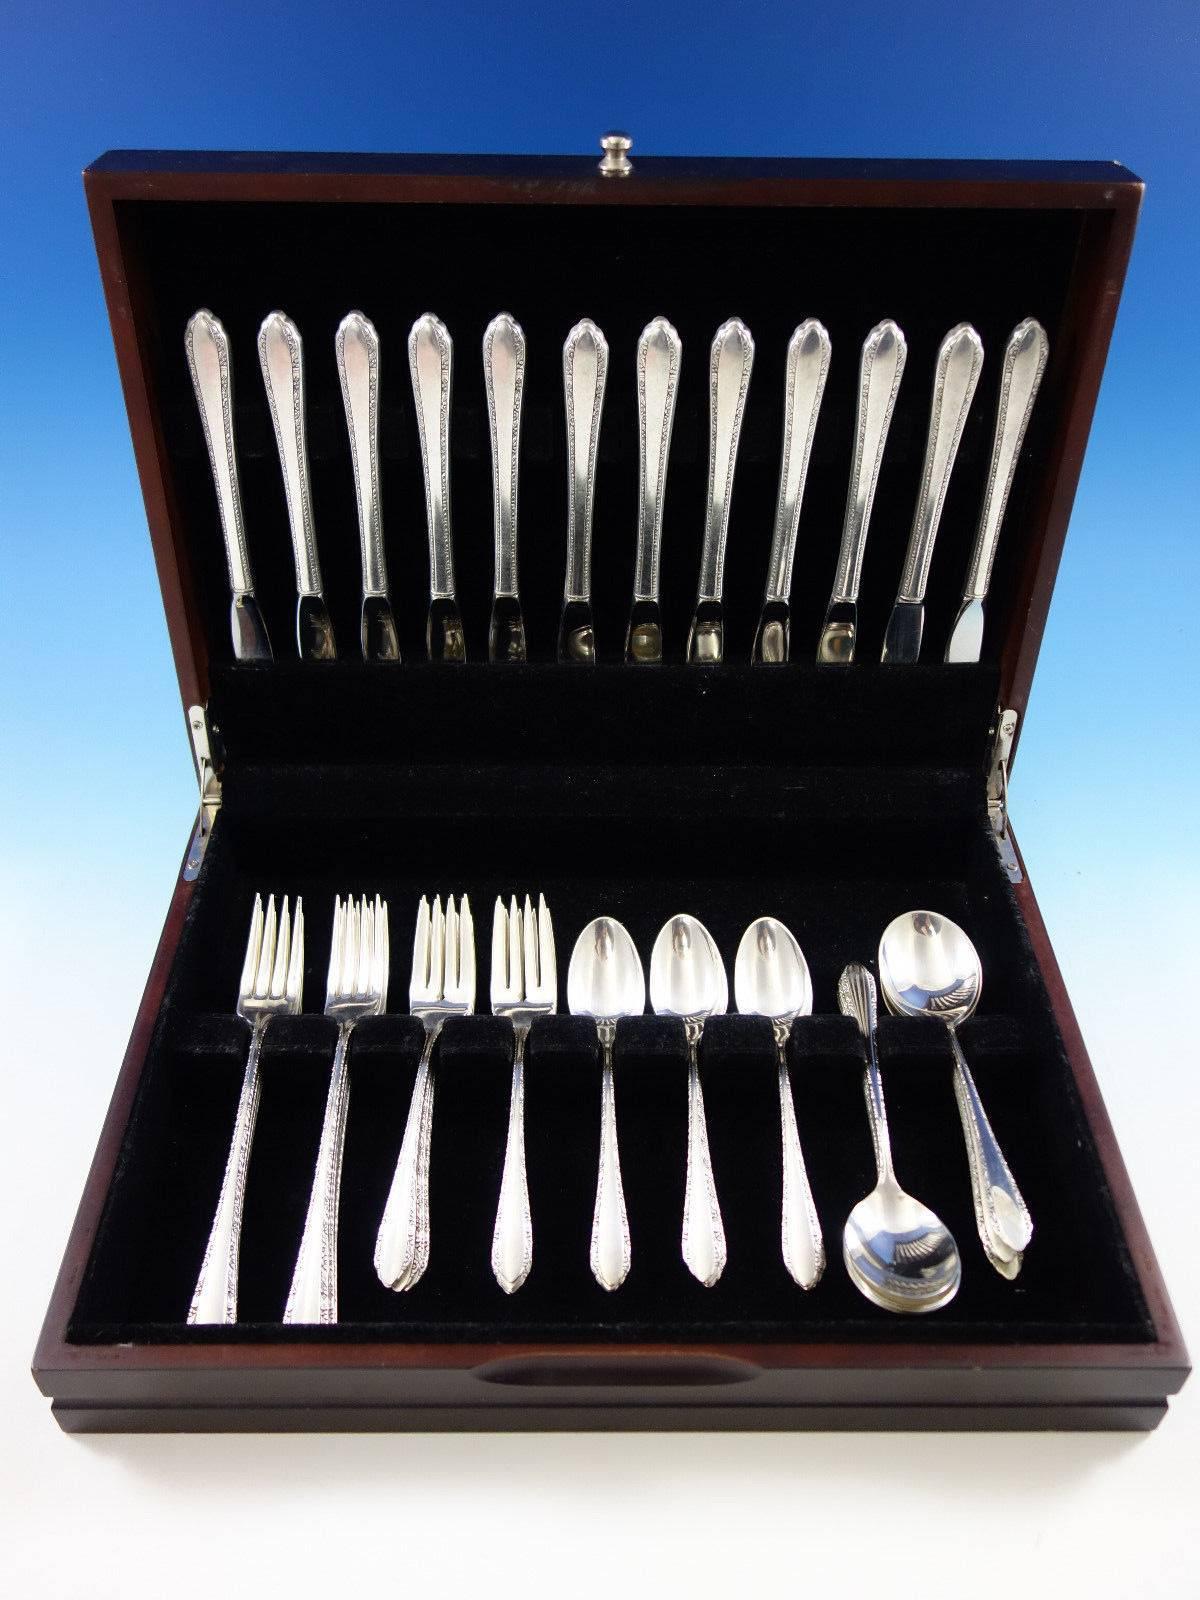 This set includes:

12 Grille size knives (with long handle), 8 1/4